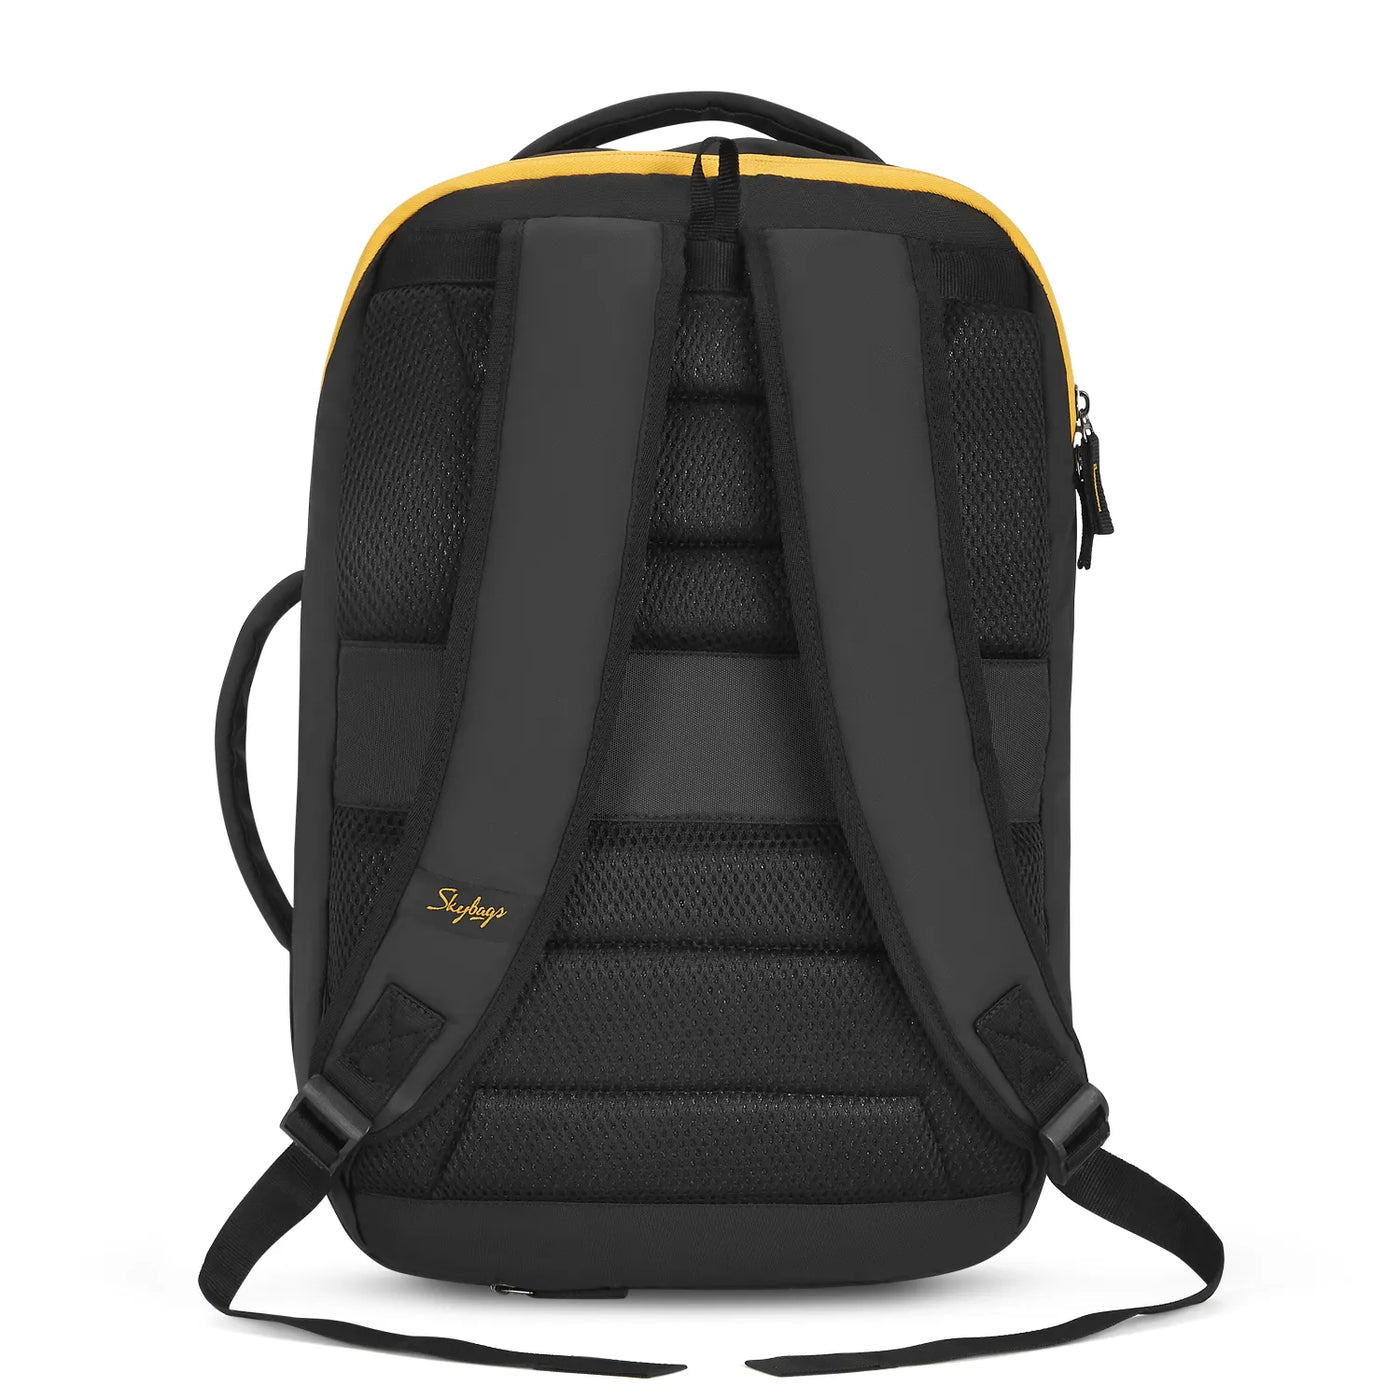 Buy Skybags 30 Ltrs Black Medium Laptop Backpack with Rain Cover Online At  Best Price @ Tata CLiQ